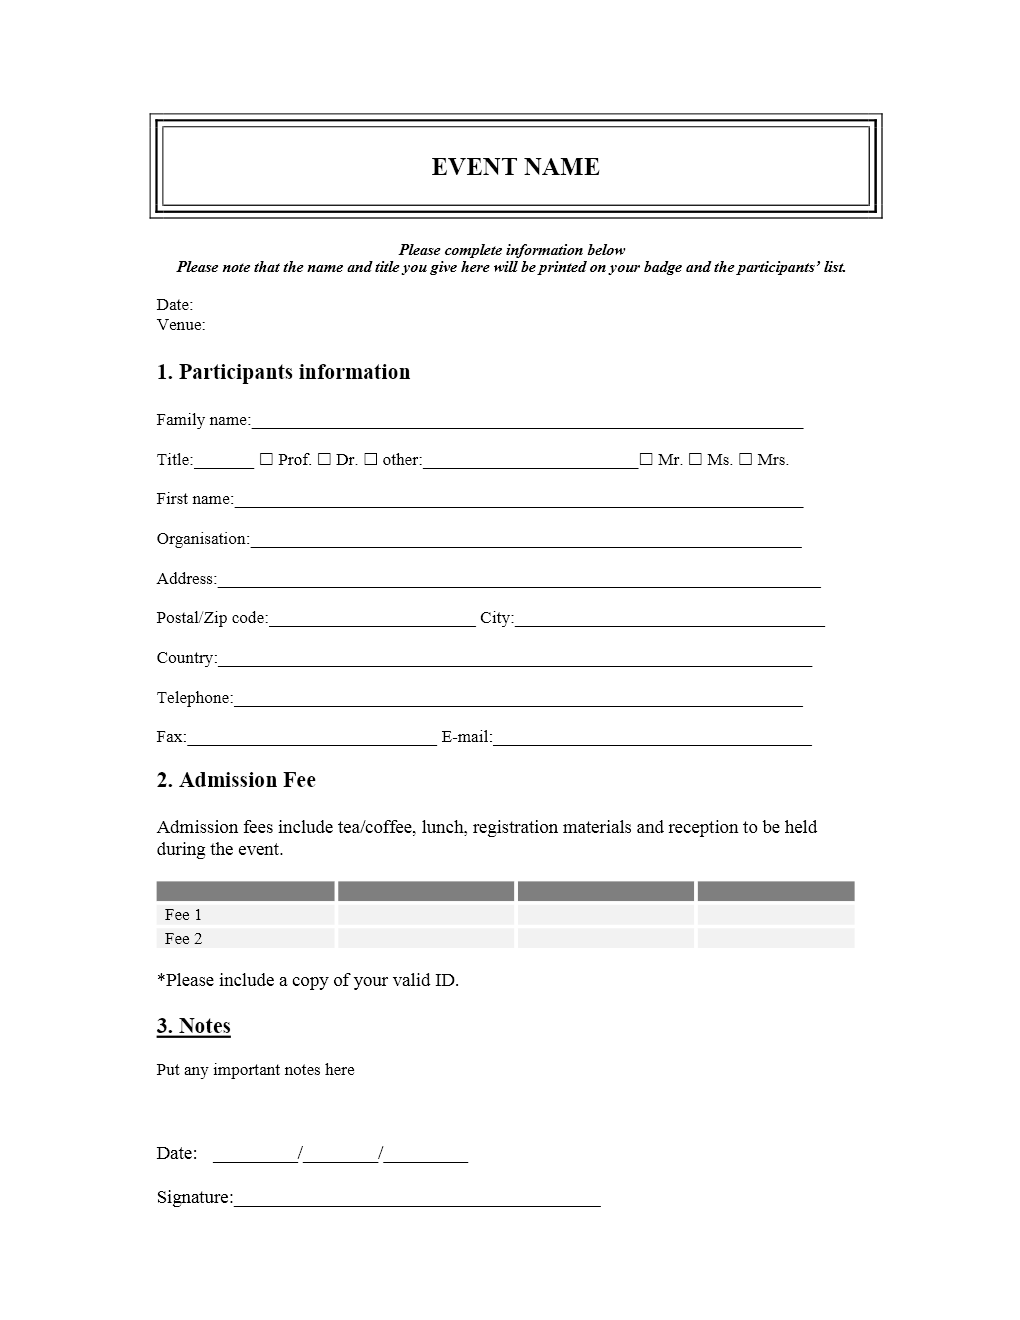 event registration form template word   Boat.jeremyeaton.co